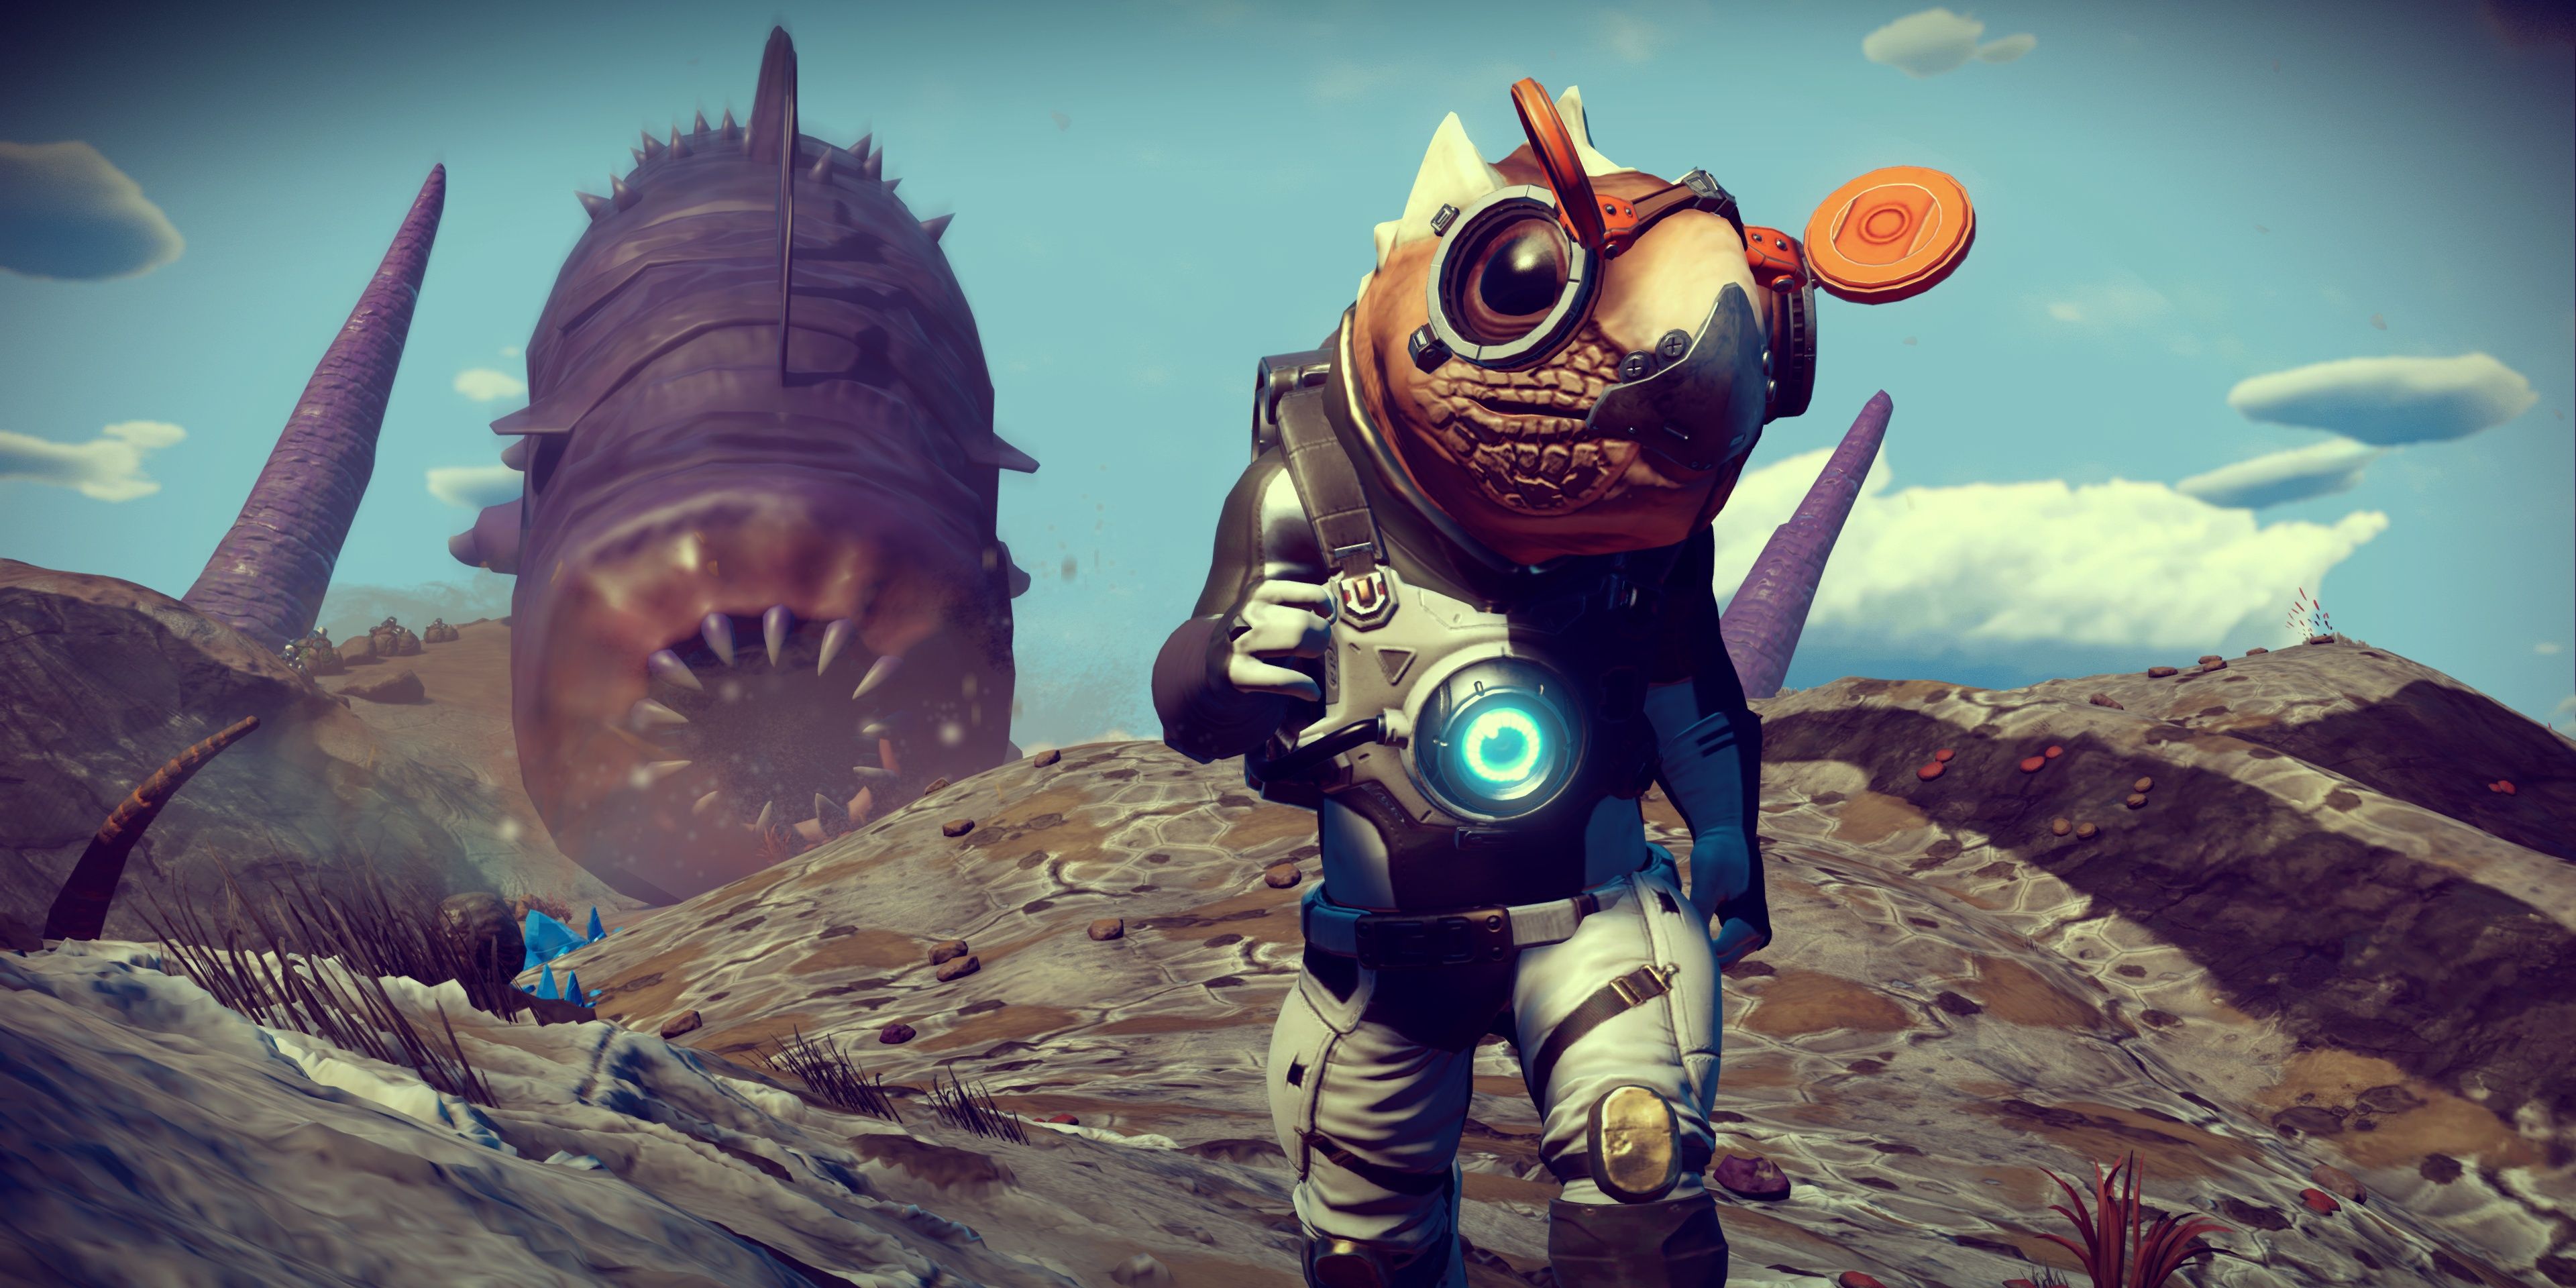 A sandworm emerges from the ground behind a Gek alien